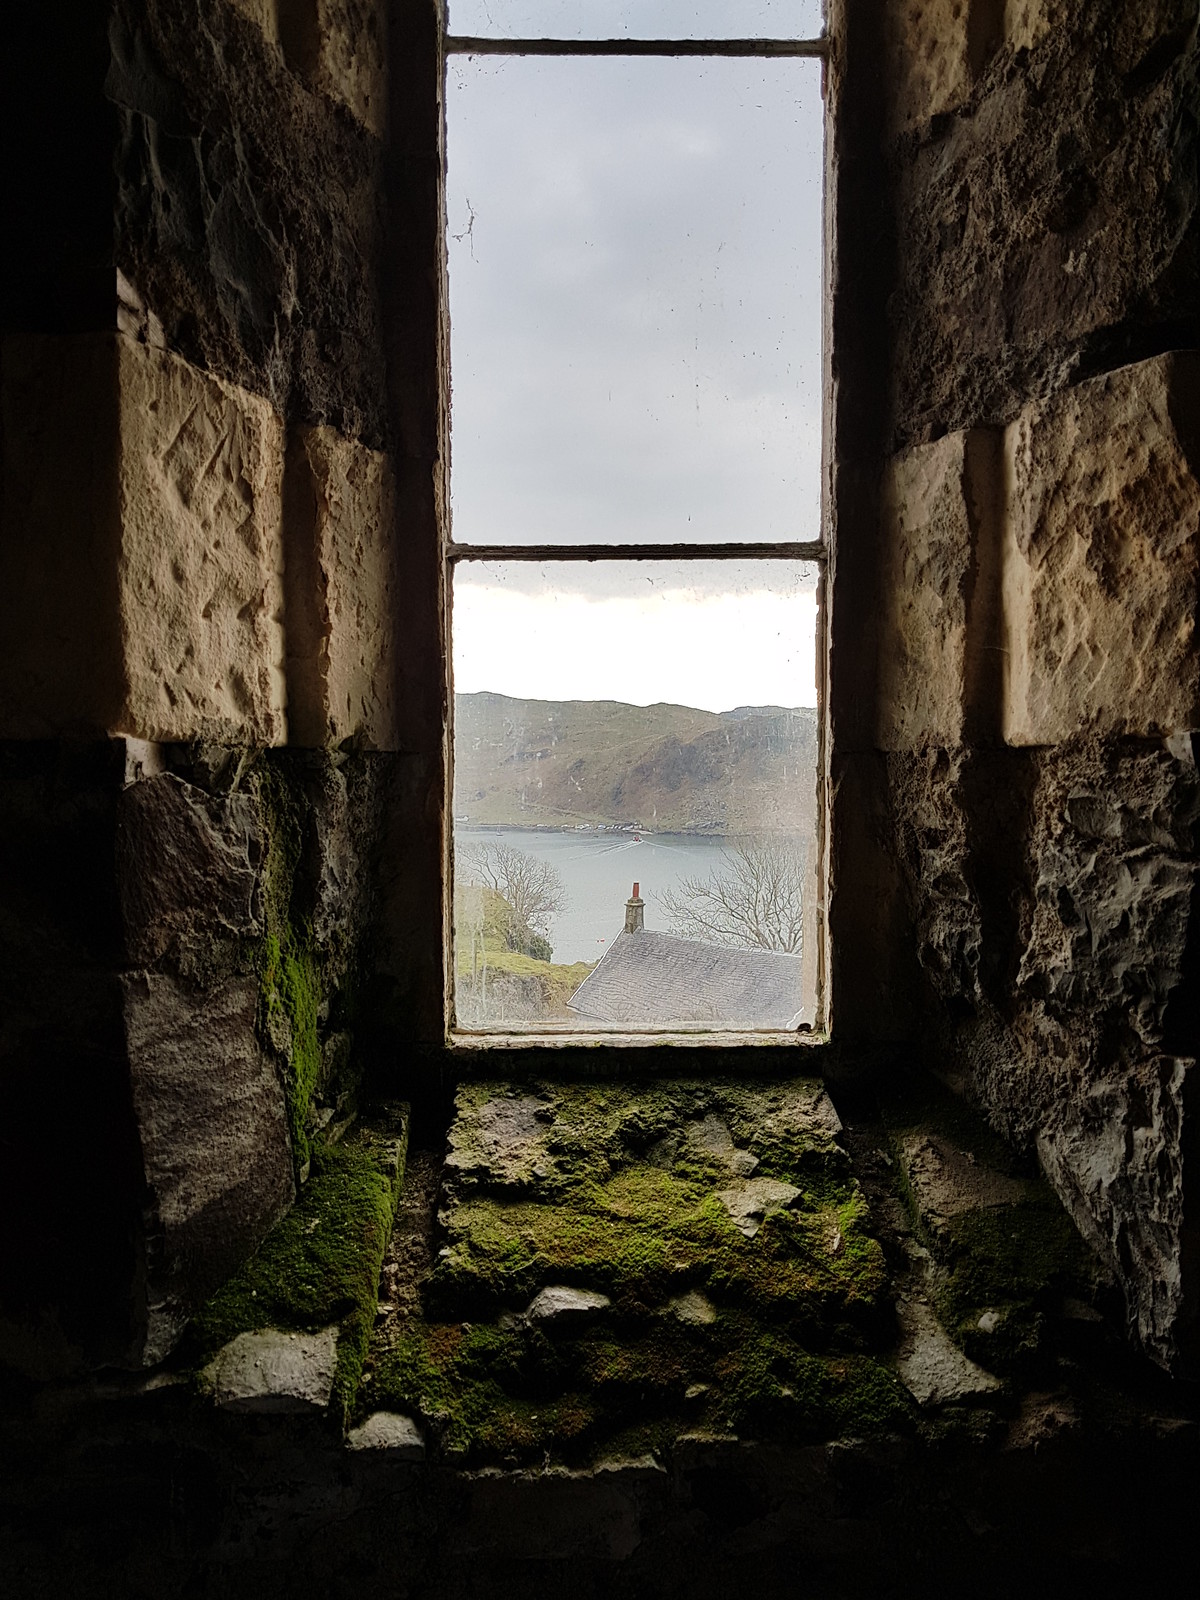 The view from inside Kerrera schoolhouse